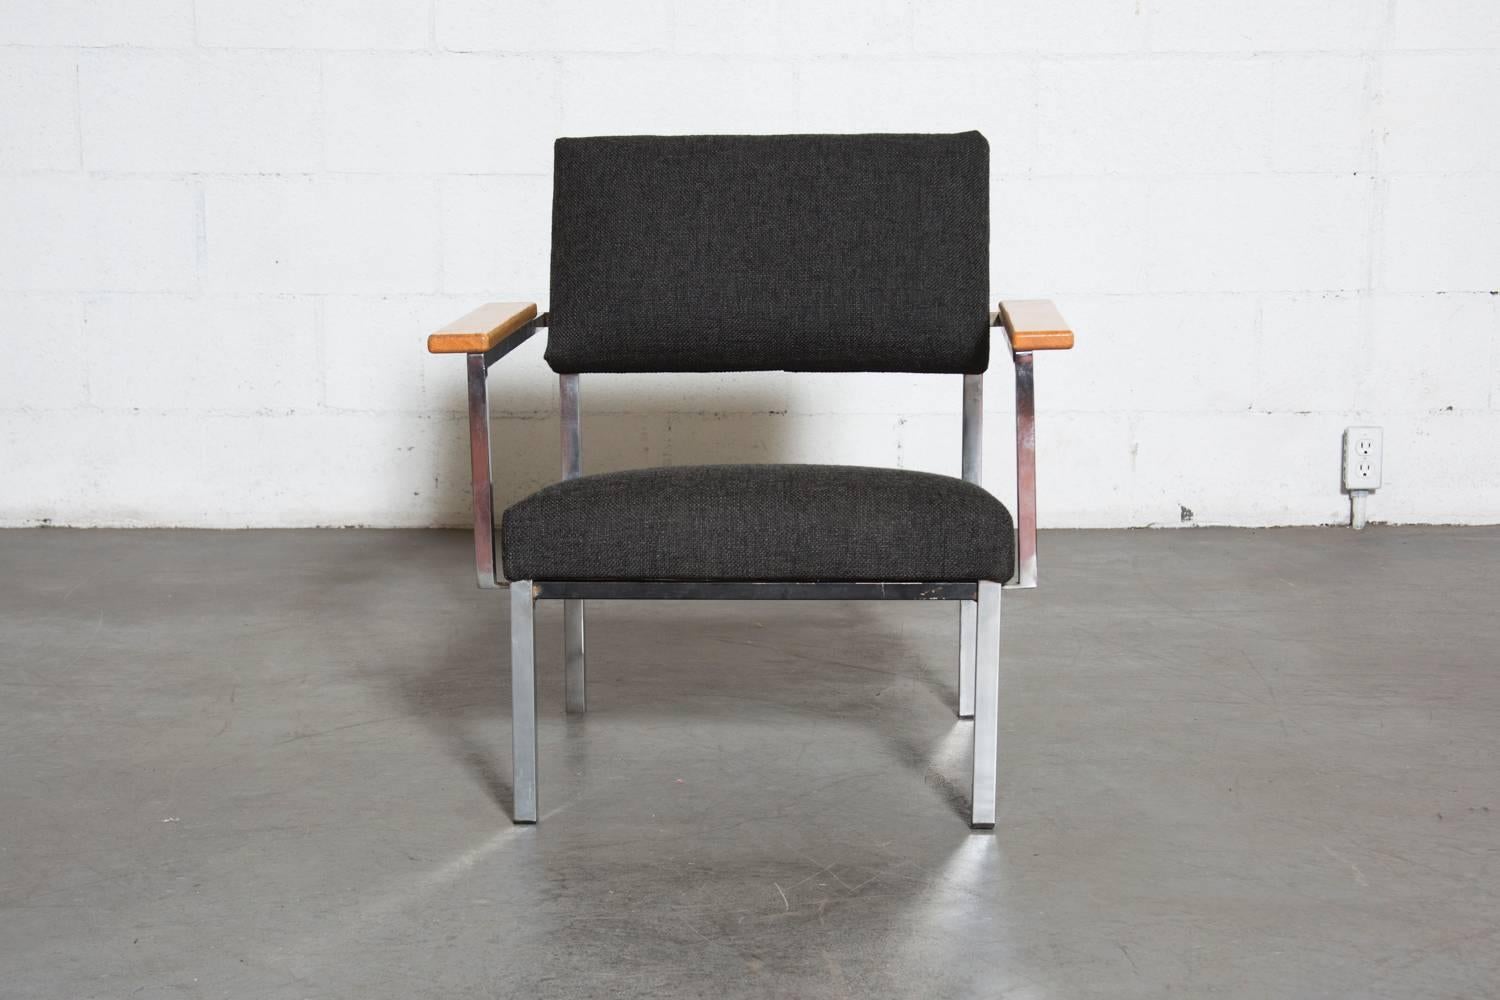 Mid Century, 1960s chrome framed chair with new charcoal upholstered seating and contrasting blonde armrests. Designed by Martin Visser for 't Spectrum in the early 1960s.  Wood is in original condition. Chrome has some areas of pitting and loss.